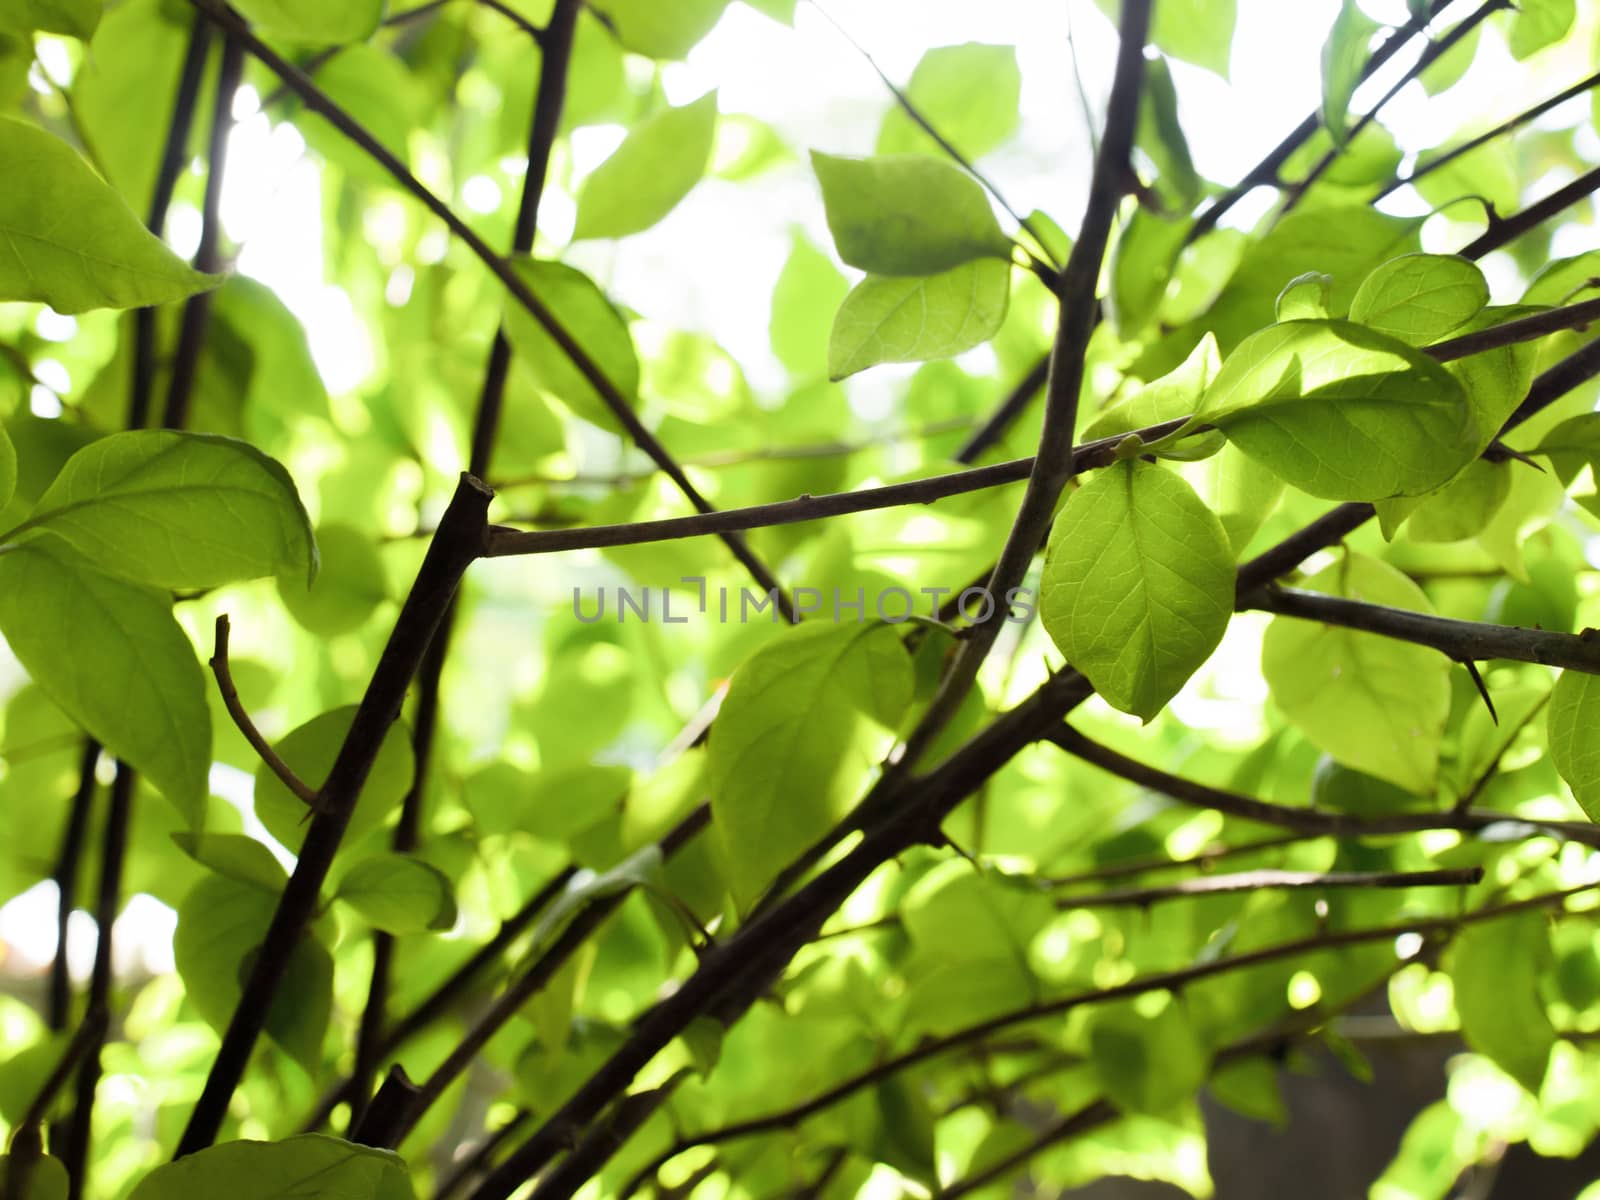 COLOR PHOTO OF LEAVES UNDER SUNLIGHT, STOCK PHOTO